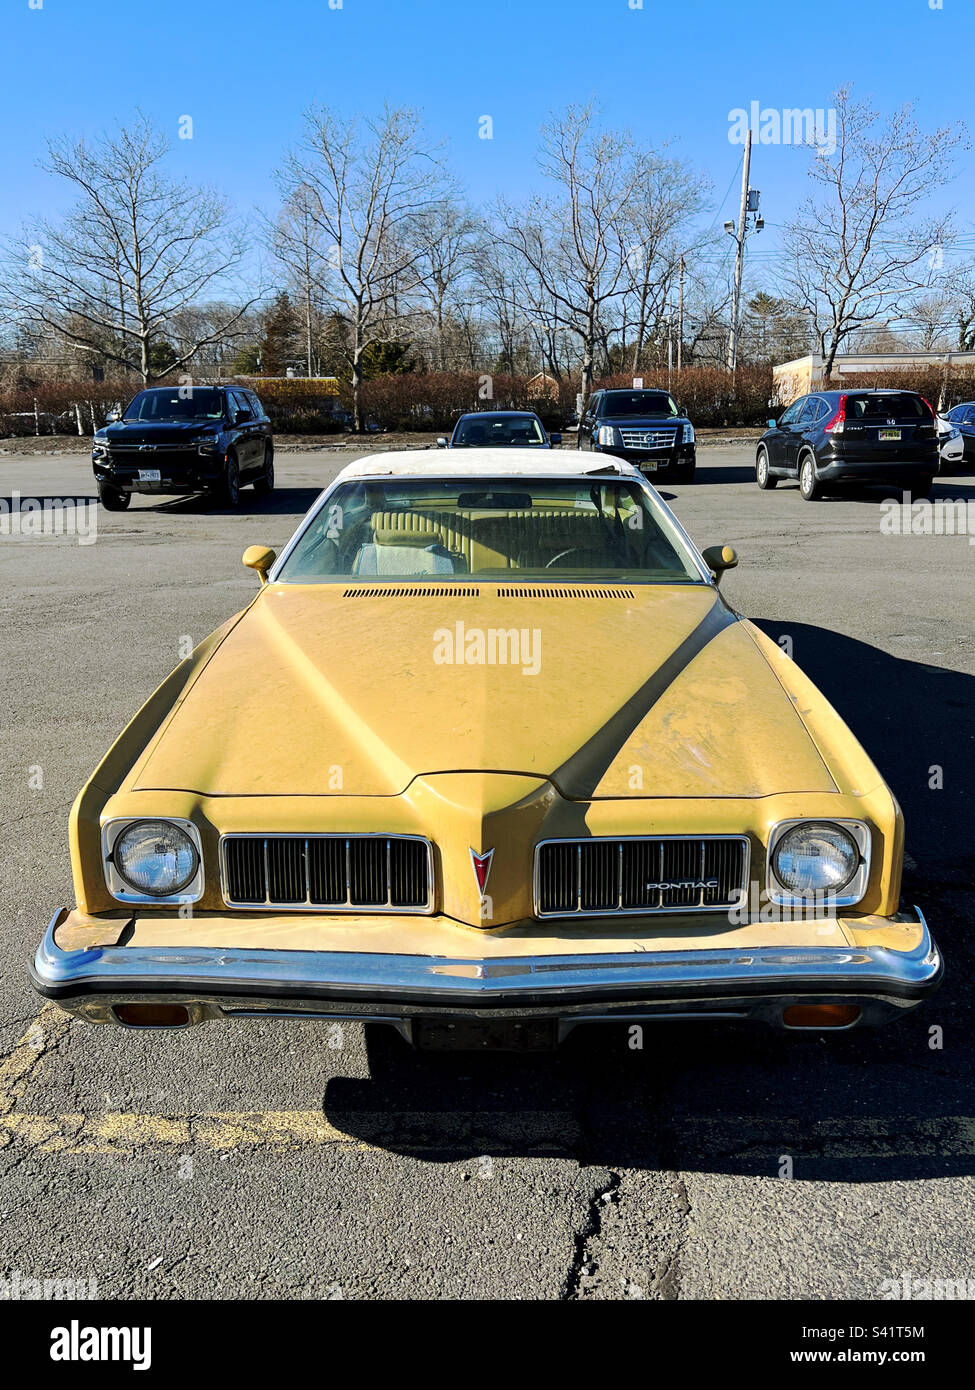 An old yellow Pontiac car in a parking lot in New York, USA. Stock Photo